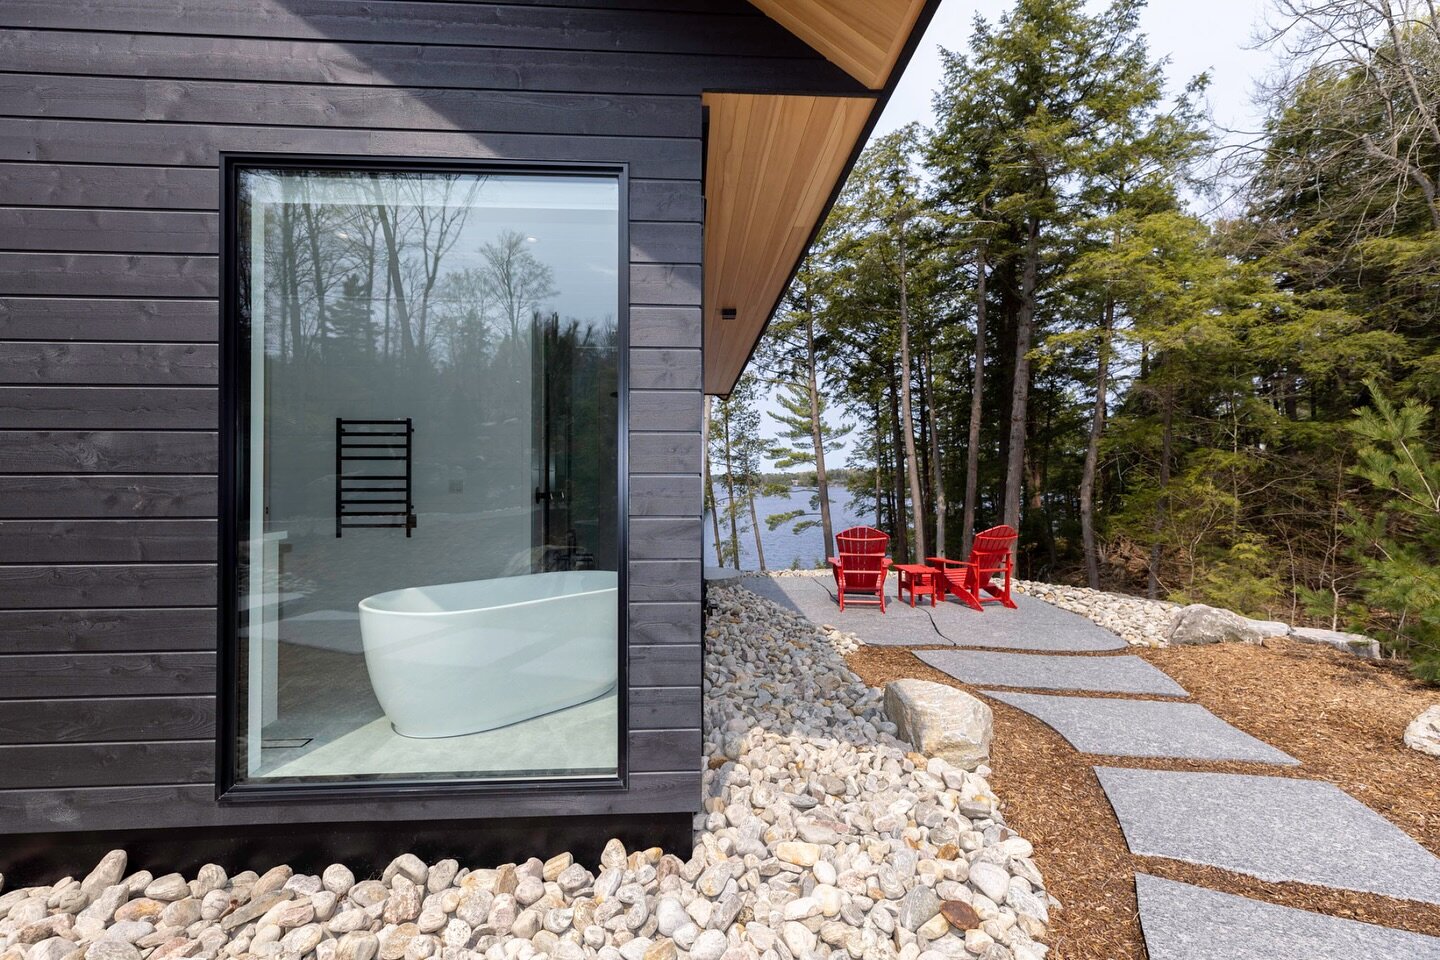 Hard to believe today, but Summer is right around the corner (hang in there, Muskoka)! Project: Maile Run, Lake Joseph

Build: @kellyprojectmgmt
Design: Muskoka Lumber Architectural Design Centre
Materials: Muskoka Lumber

/// Soffit: 1x6 Clear Cedar